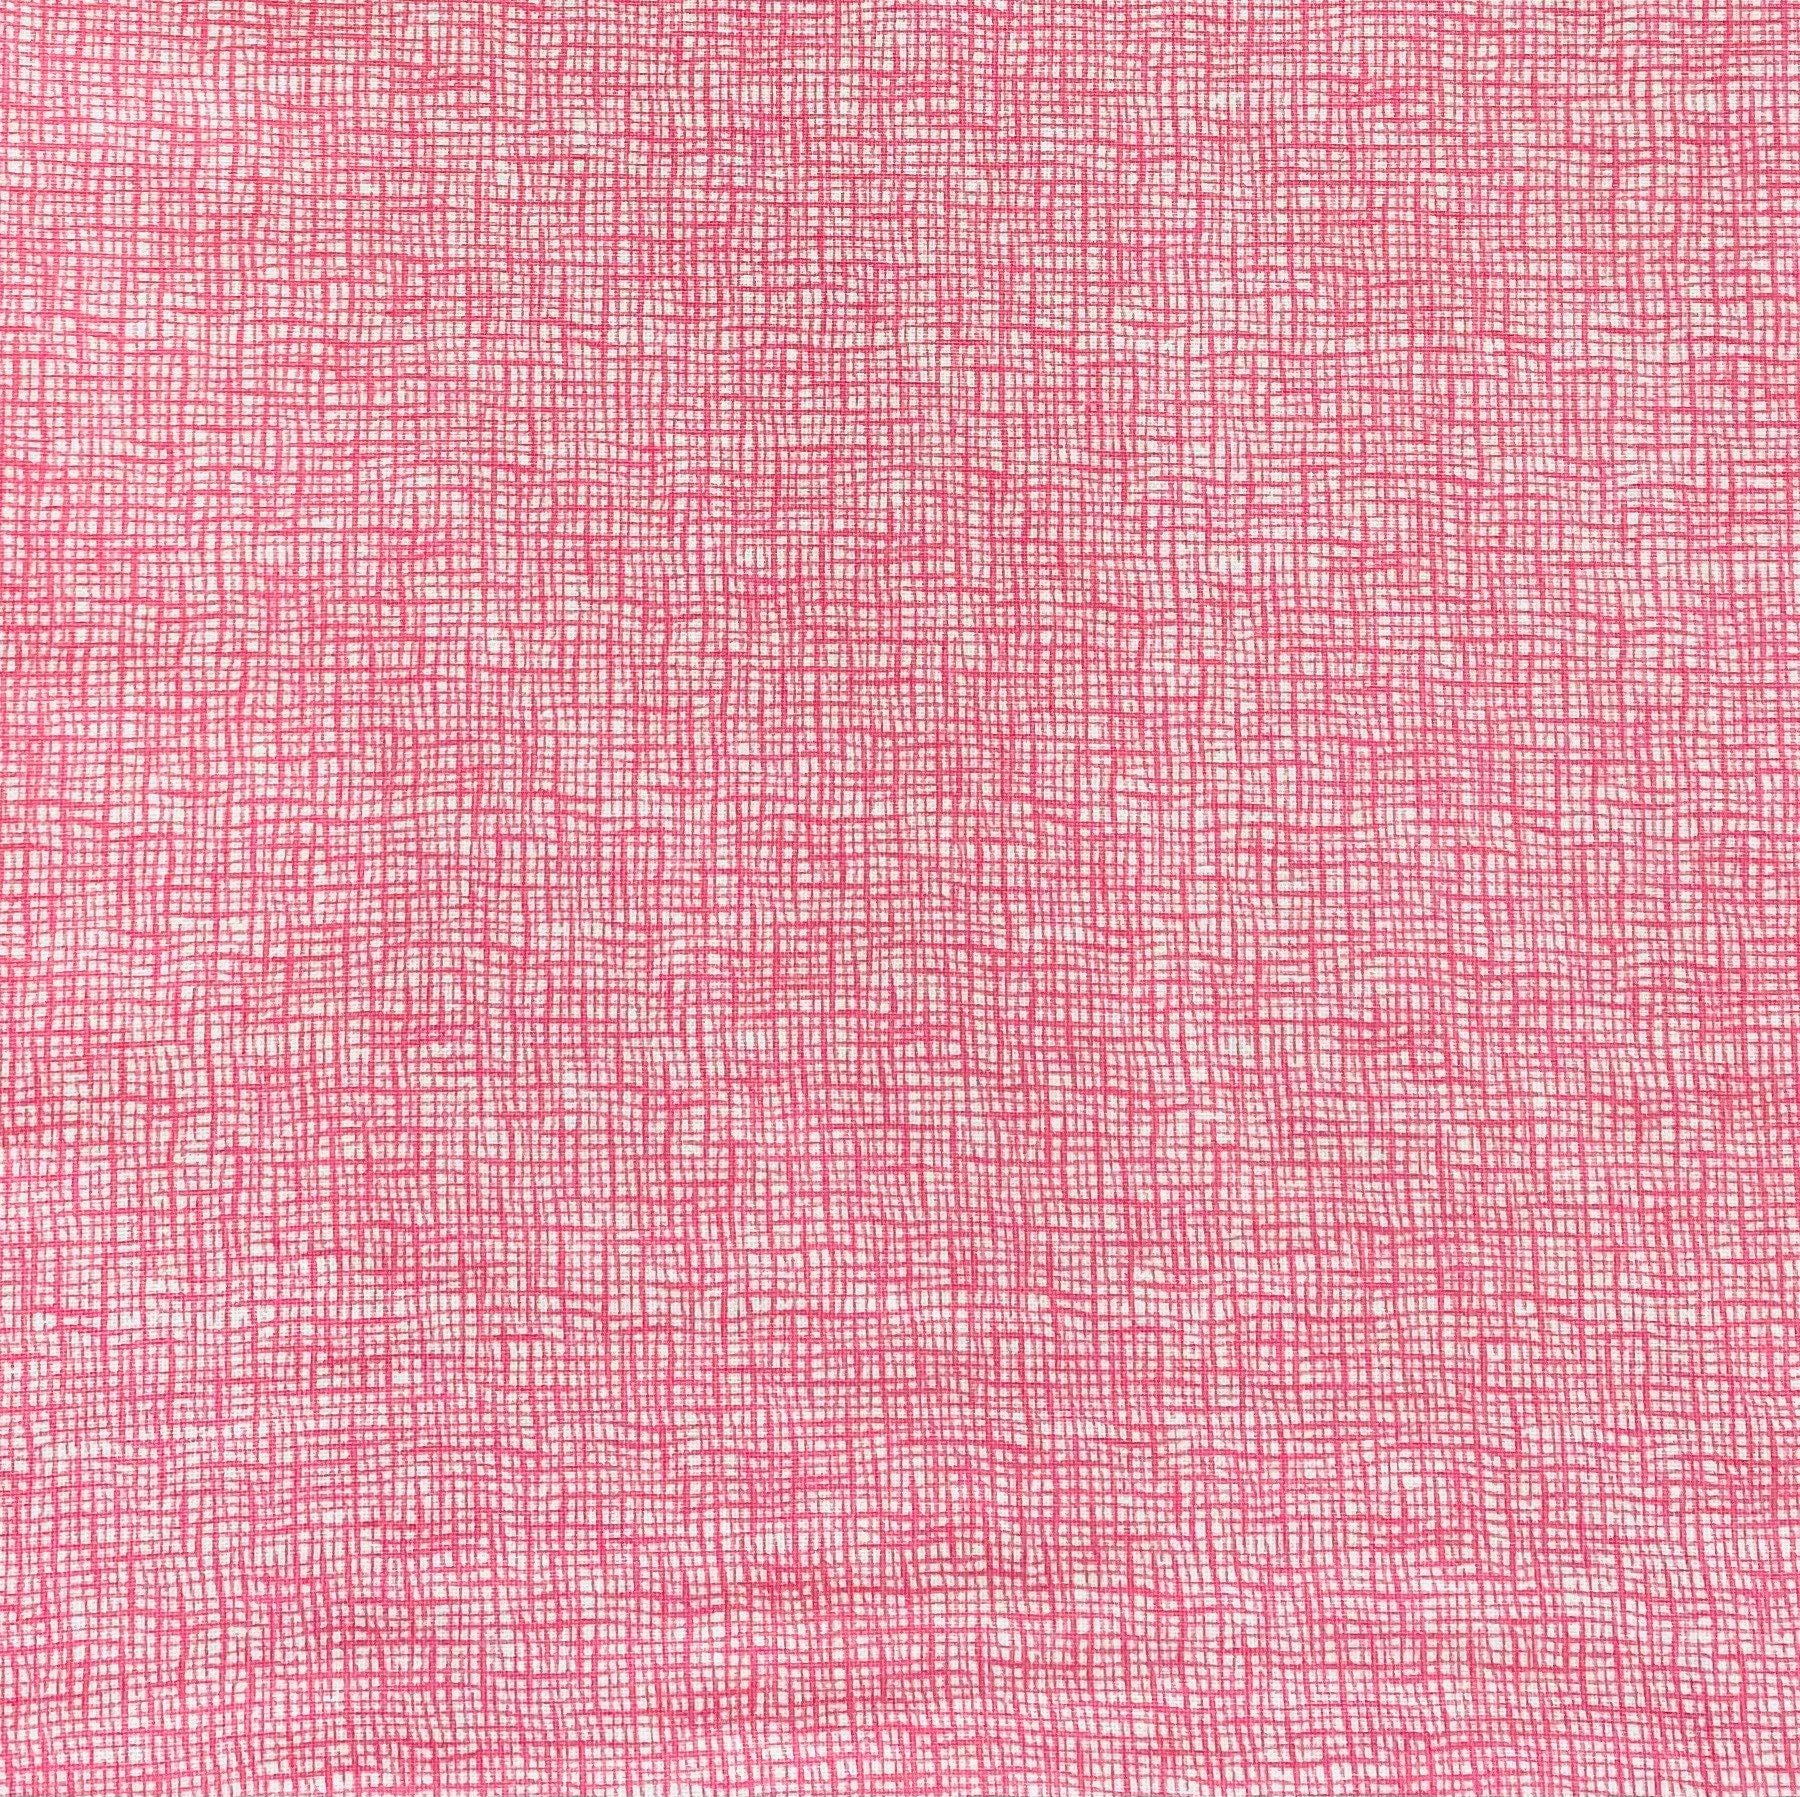 Urban Food Kit, Fabric, Pale Pink, One Size